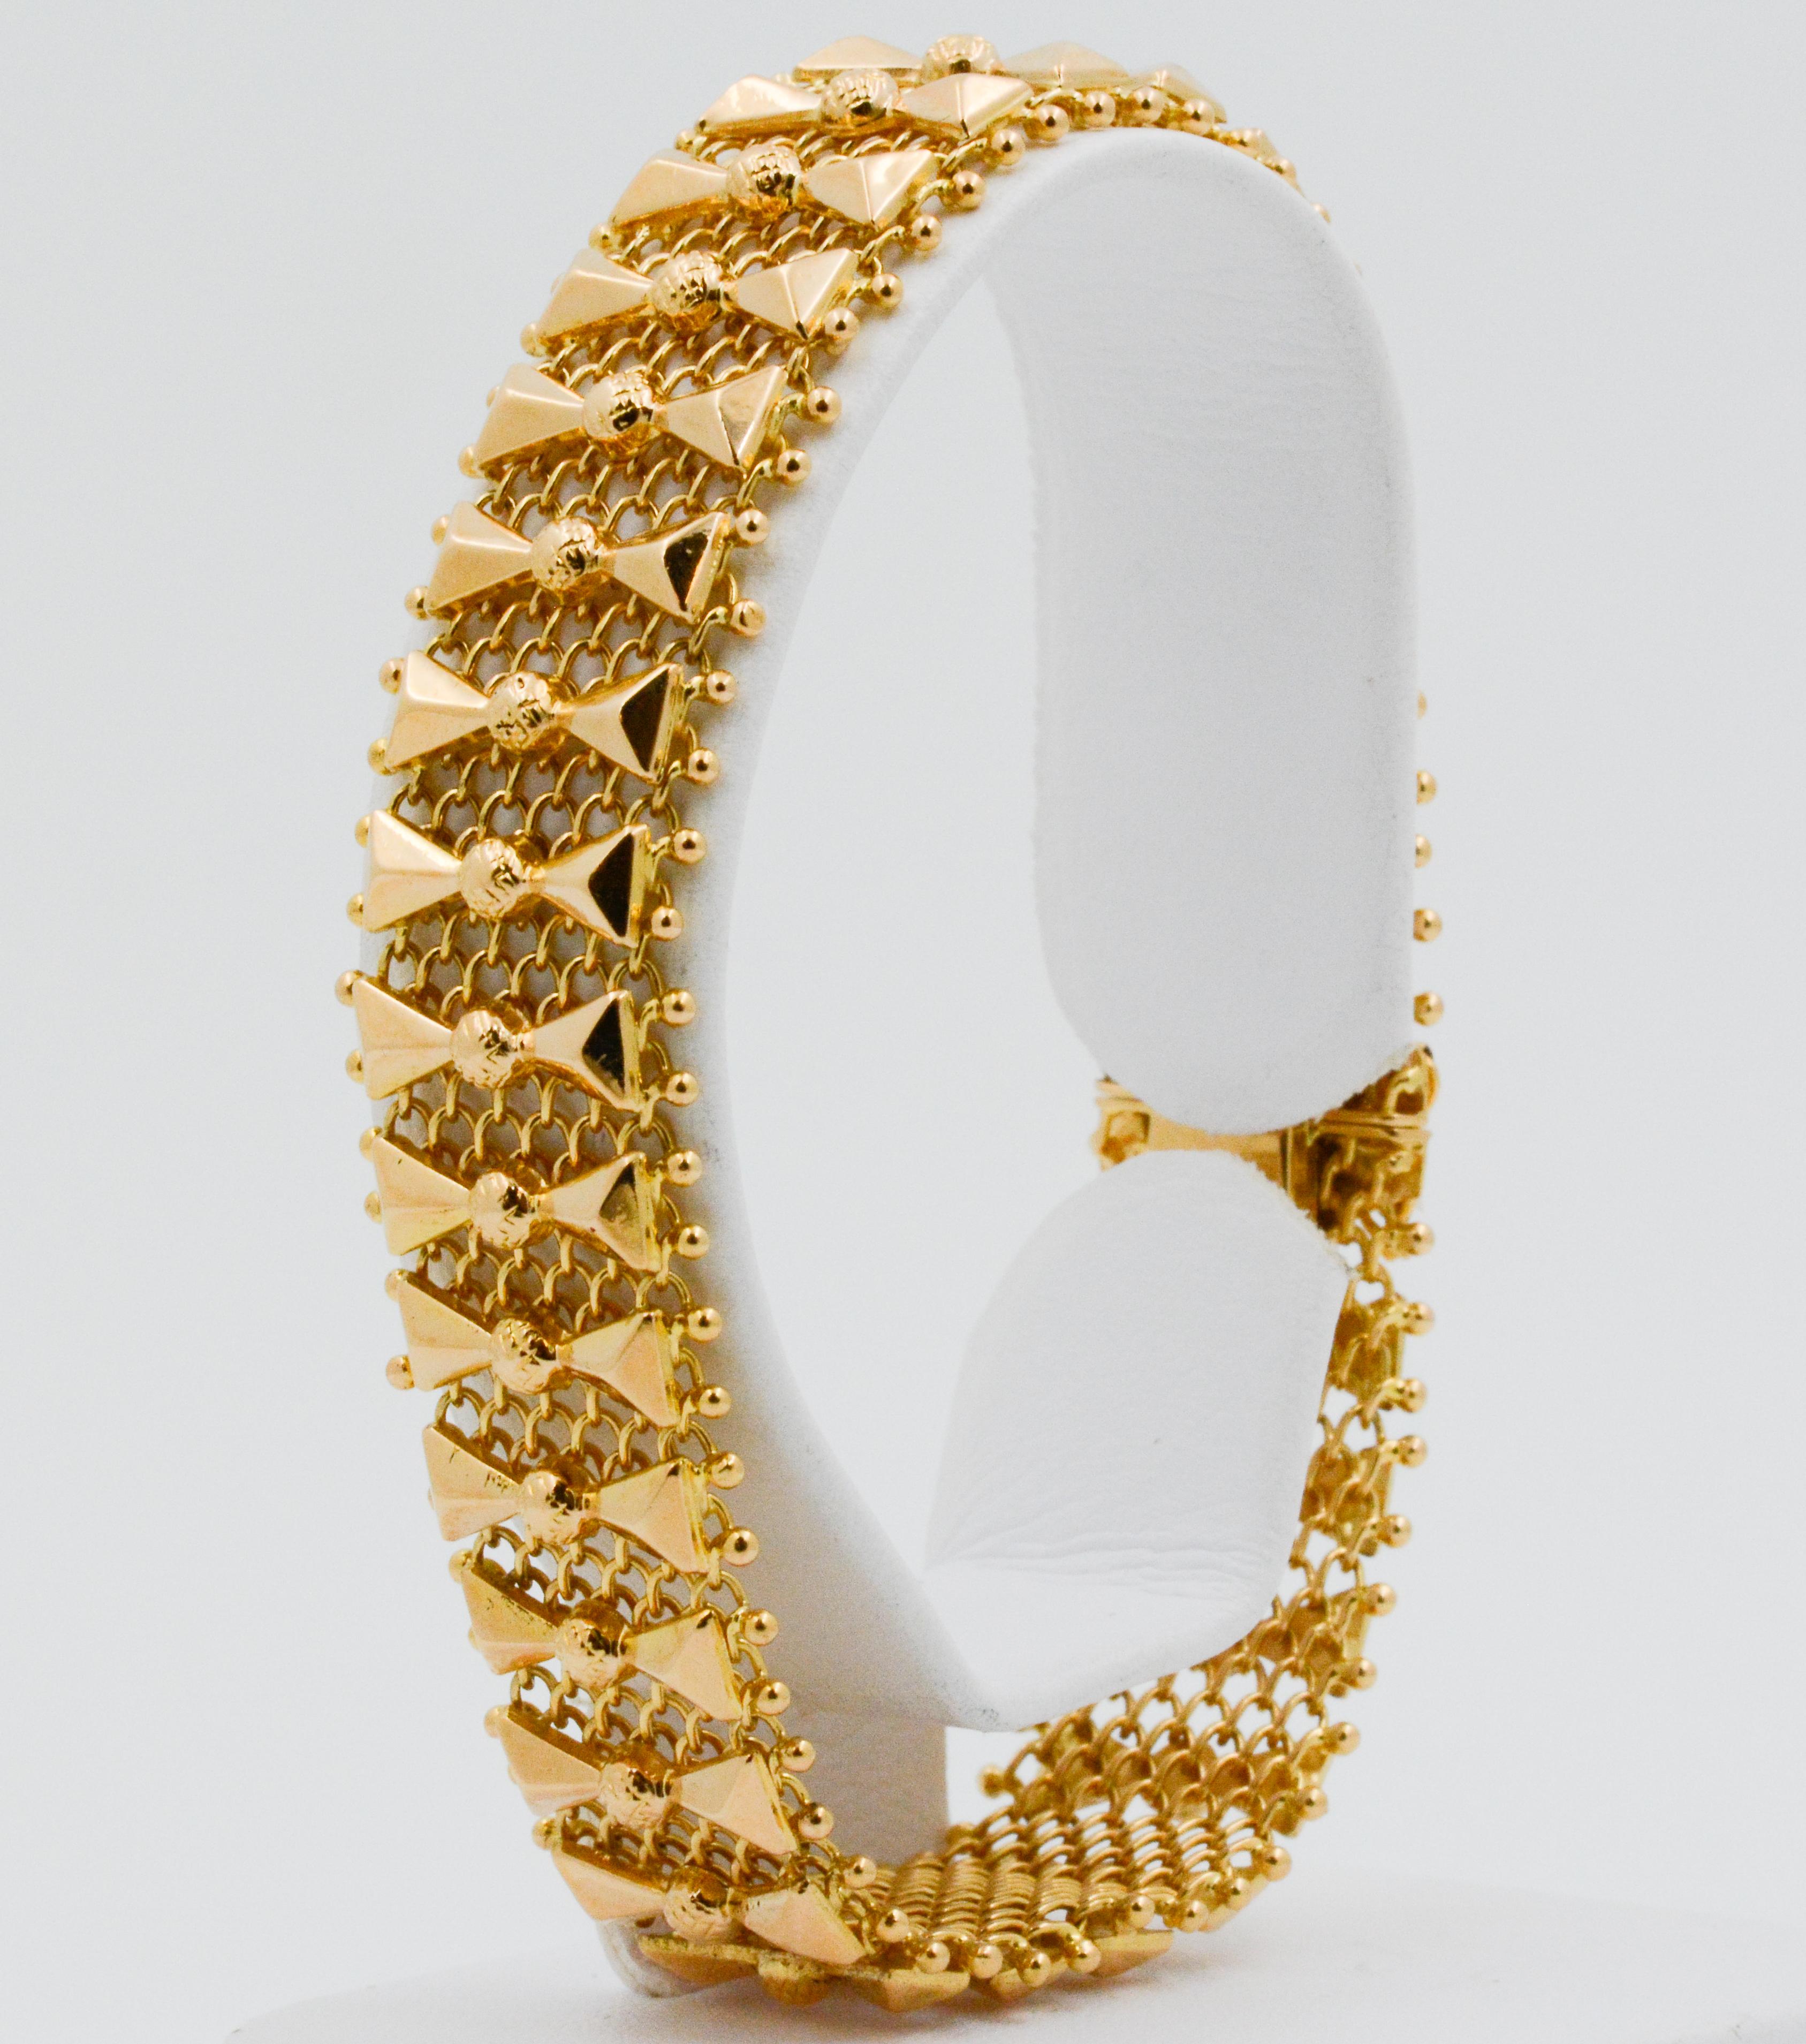 From the 1950s this retro 18k yellow gold bracelet that features two polished pyramid design with dot centers laying vertically on top of chainmail. The dot centers have a weave design that resemble a bow or the Golden Snitch from Harry Potter. The